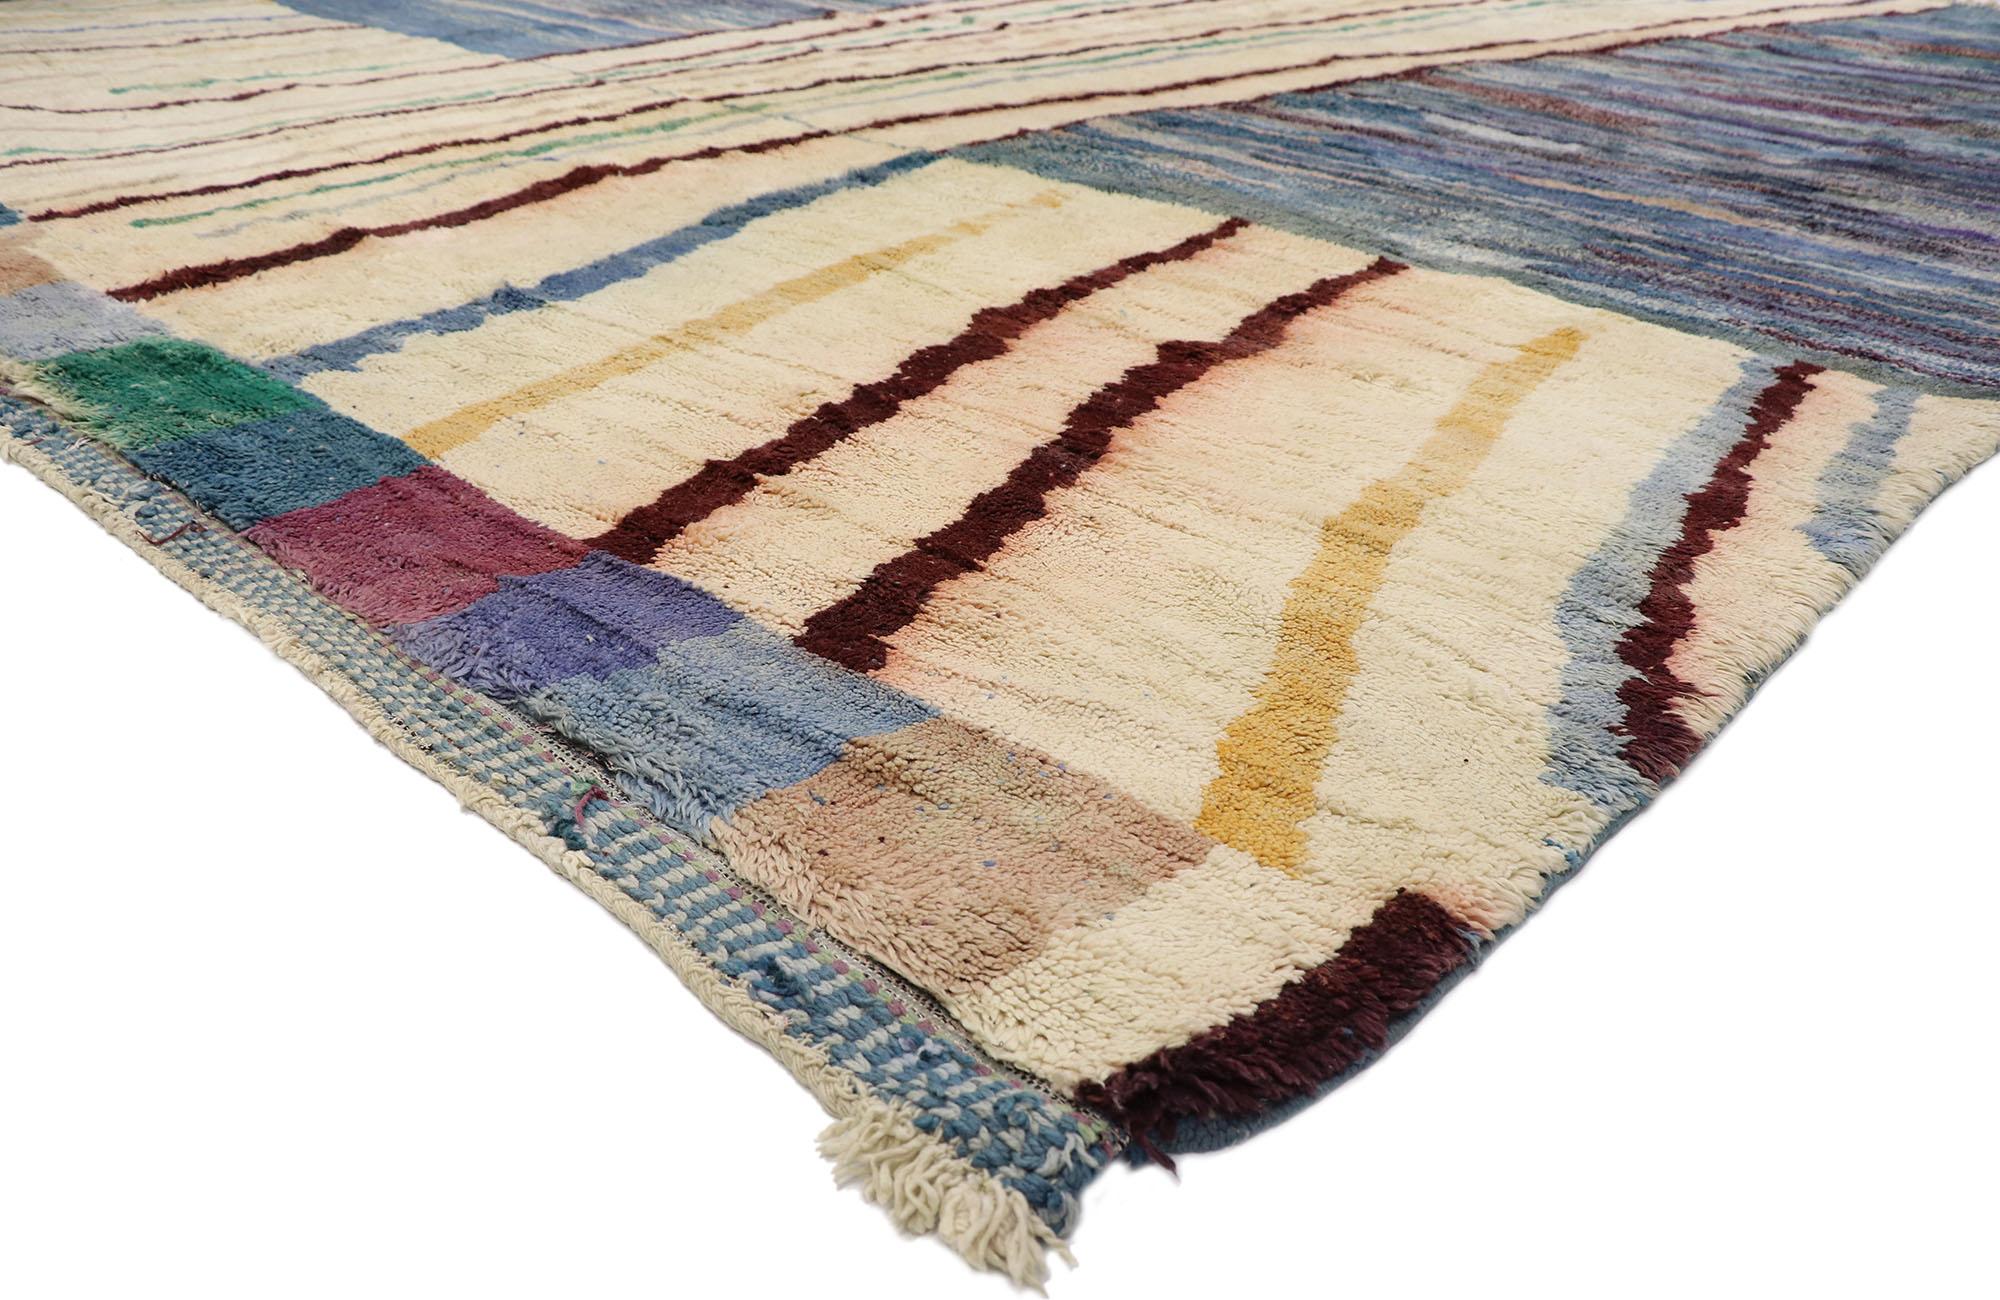 21121 Oversized Abstract Moroccan Rug 15'03 x 17'00.
Abstract Expressionist style meets Bohemian Rhapsody in this hand knotted wool oversized Moroccan rug. The visual complexity and intense earthy colors woven into this piece work together creating